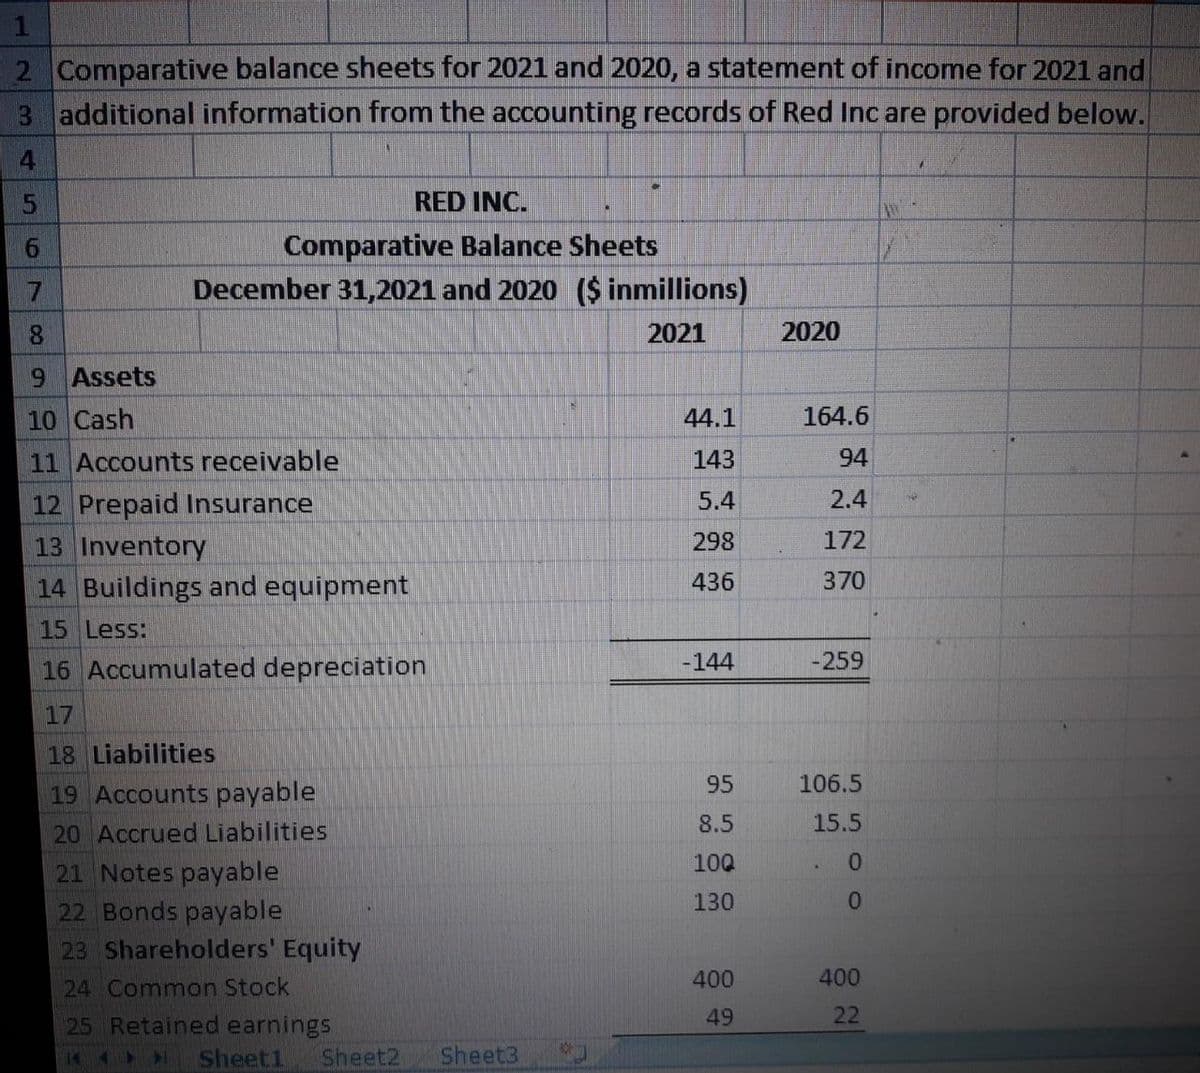 2 Comparative balance sheets for 2021 and 2020, a statement of income for 2021 and
3 additional information from the accounting records of Red Inc are provided below.
4.
RED INC.
9.
Comparative Balance Sheets
December 31,2021 and 2020 ($ inmillions)
2021
2020
9 Assets
10 Cash
44.1
164.6
11 Accounts receivable
143
94
12 Prepaid Insurance
13 Inventory
14 Buildings and equipment
5.4
2.4
298
172
436
370
15 Less:
16 Accumulated depreciation
-144
-259
17
18 Liabilities
95
106.5
19 Accounts payable
20 Accrued Liabilities
21 Notes payable
22 Bonds payable
23 Shareholders' Equity
8.5
15.5
100
0.
130
400
400
24 Common Stock
25 Retained earnings
49
22
144>
Sheet1
Sheet2
Sheet3
